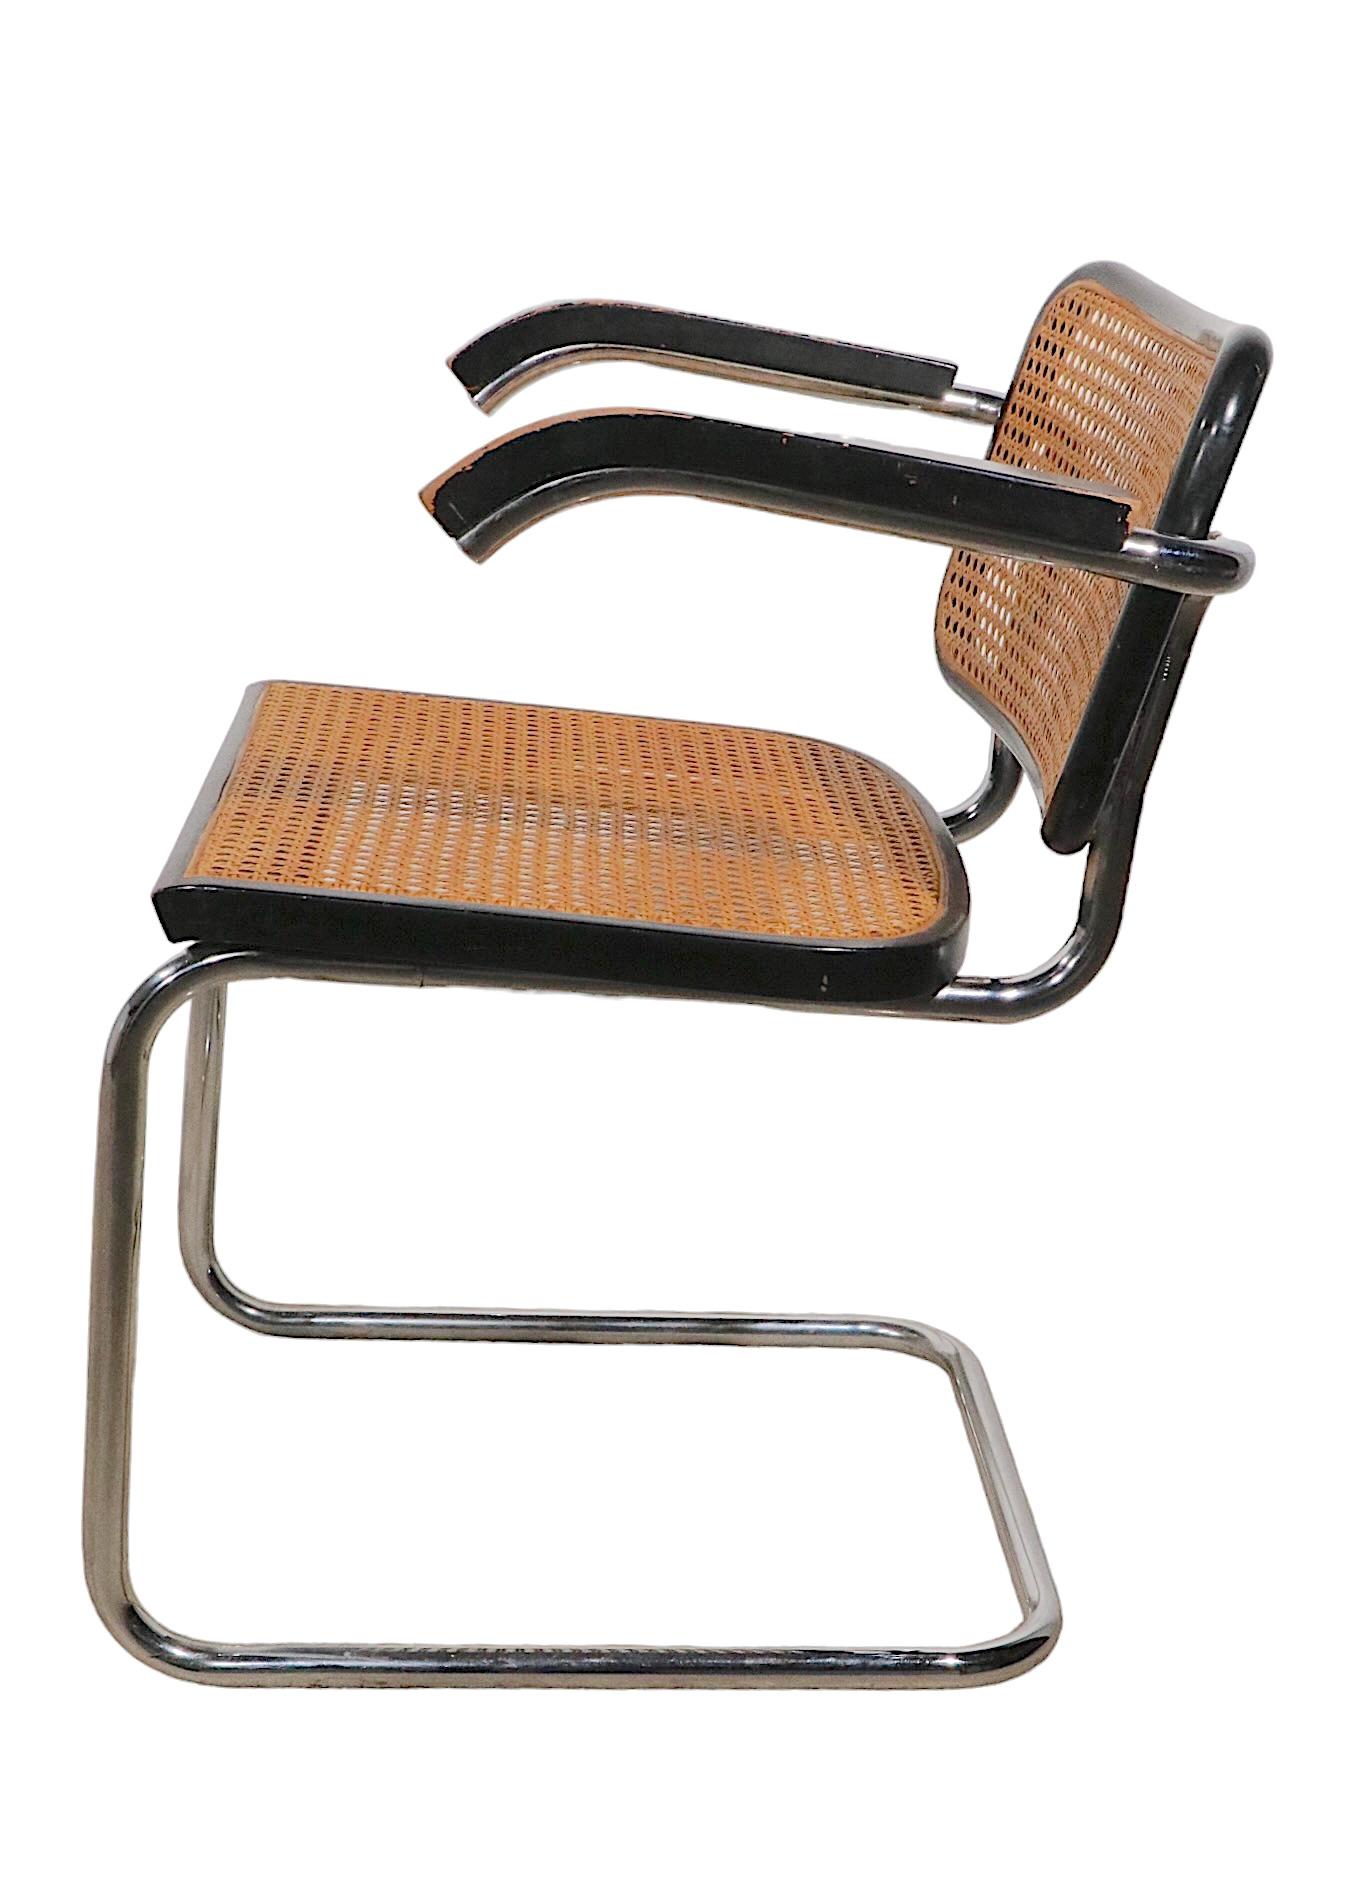 Italian Chrome and Black Cesca Chair Designed by Marcel Breuer Made in Italy circa 1970s